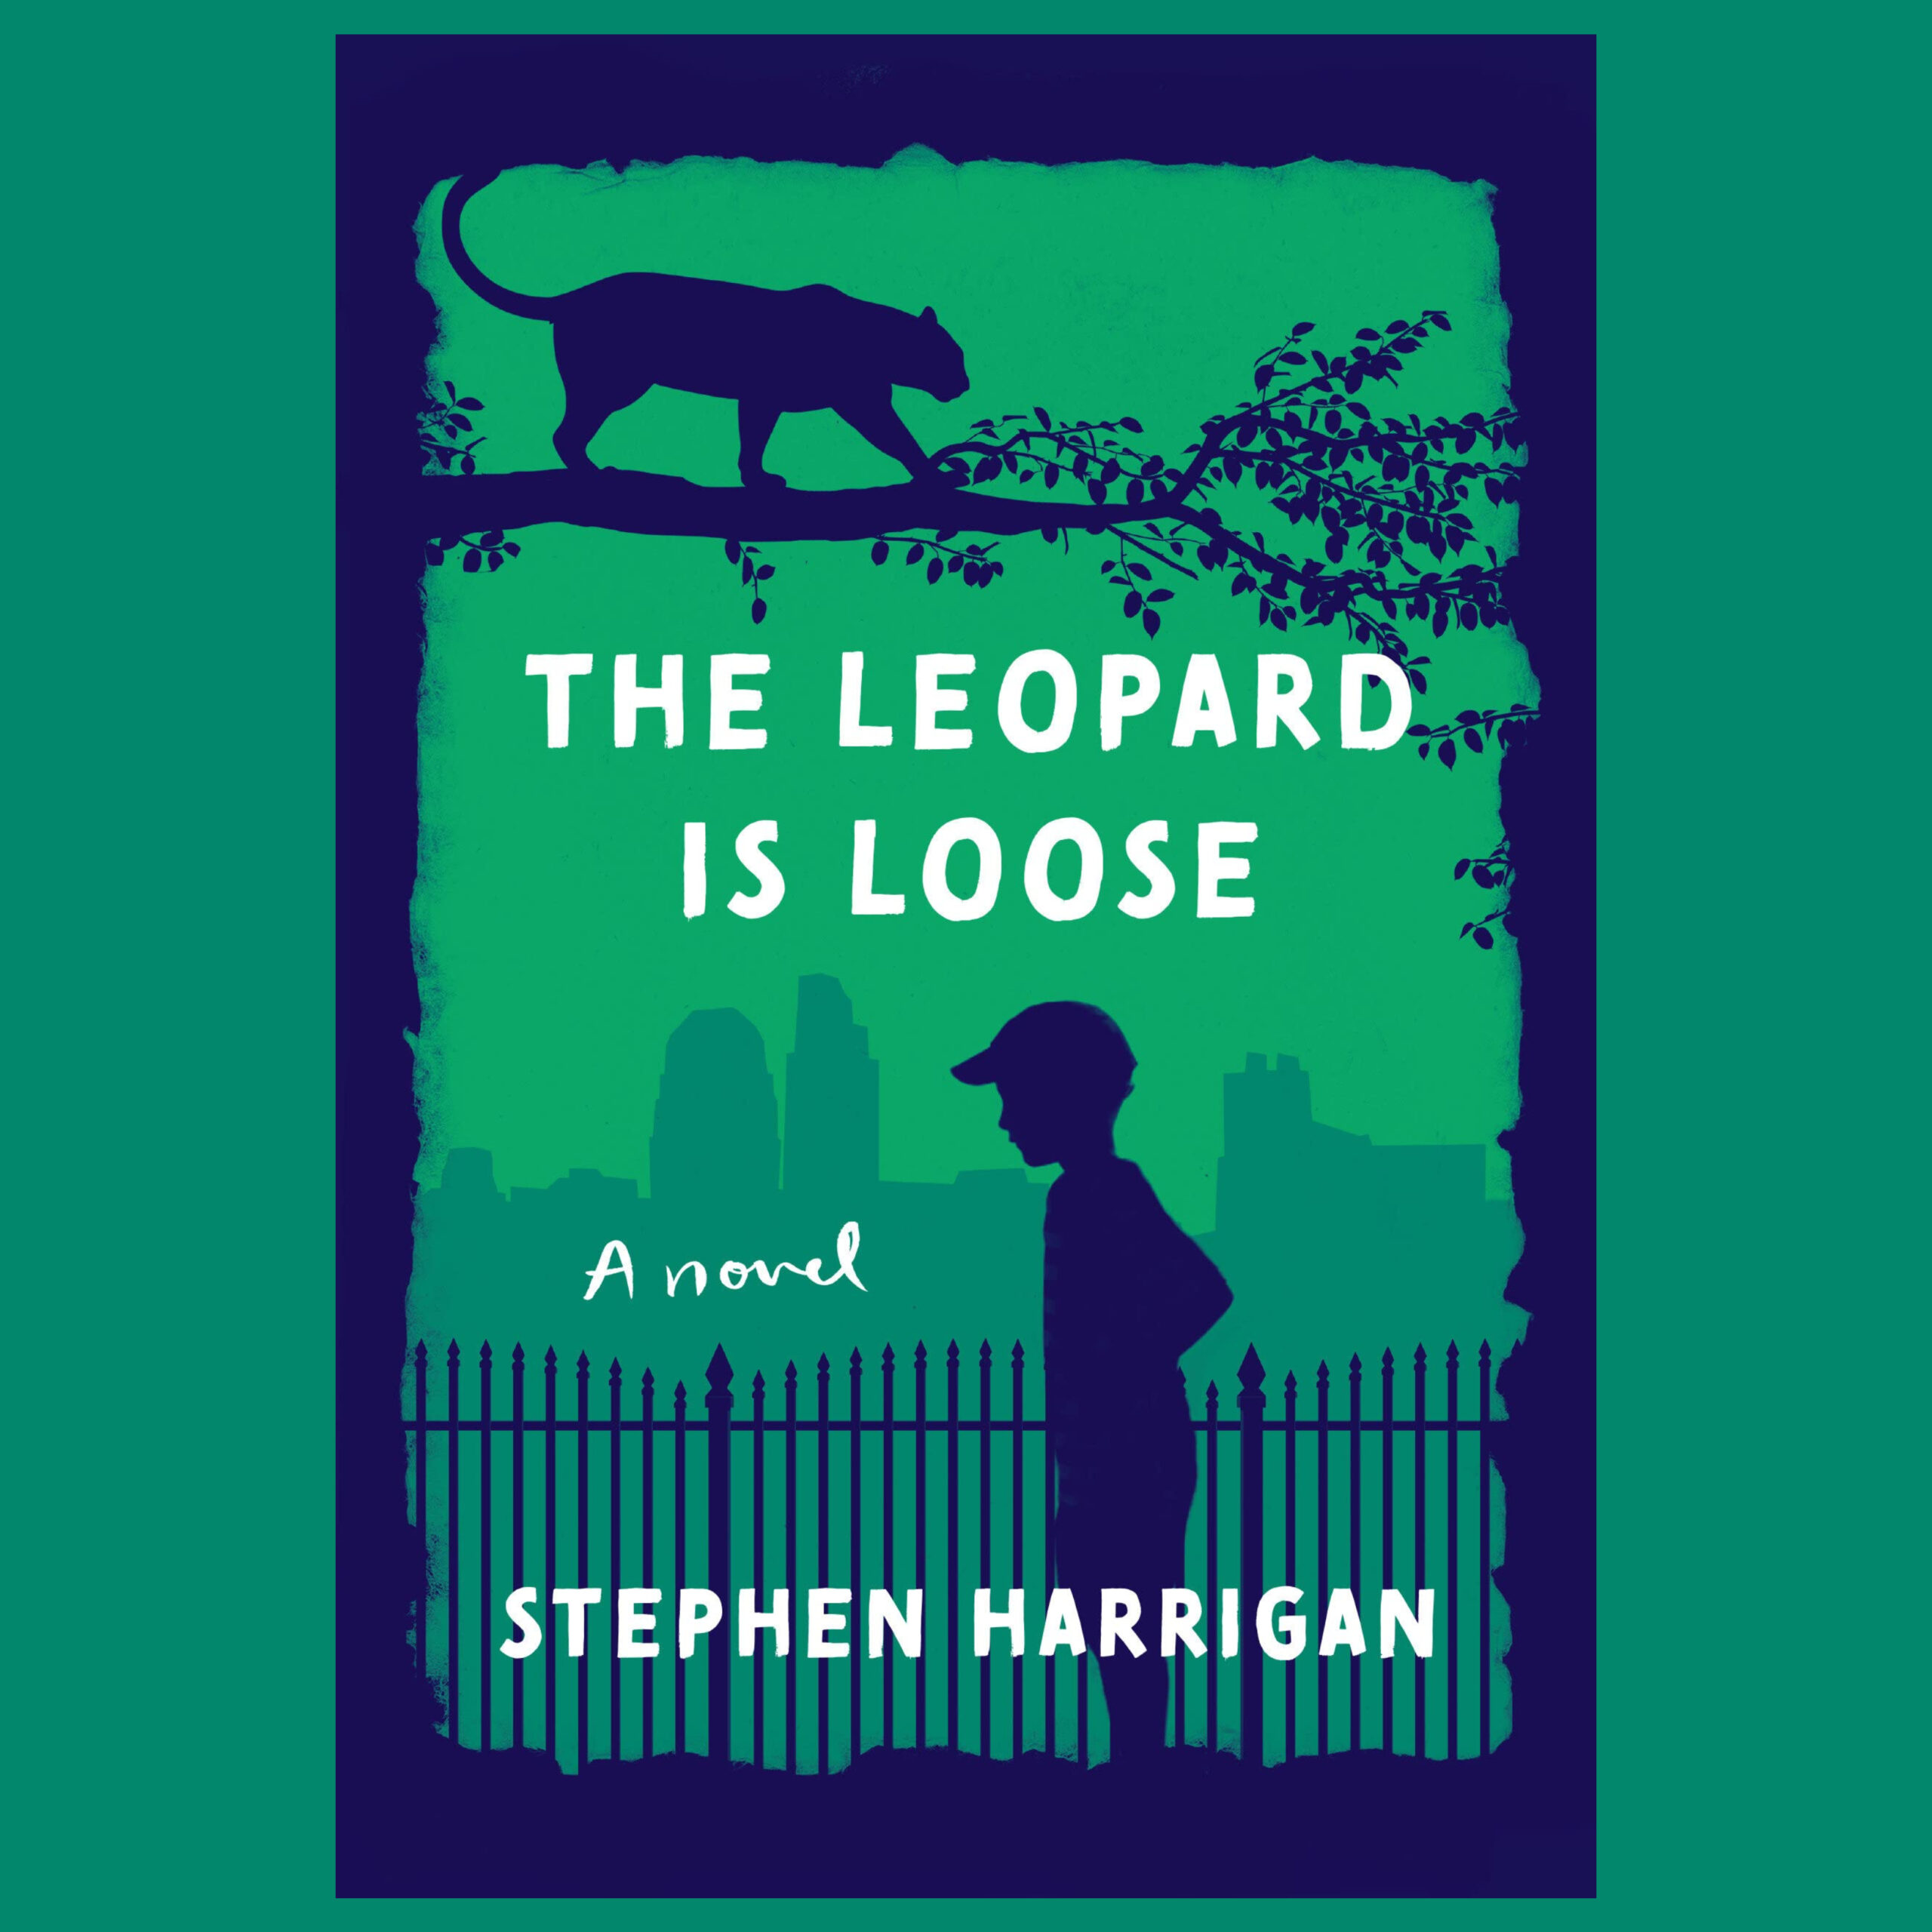 #1765 Stephen Harrigan "The Leopard is Loose" | The Book Show